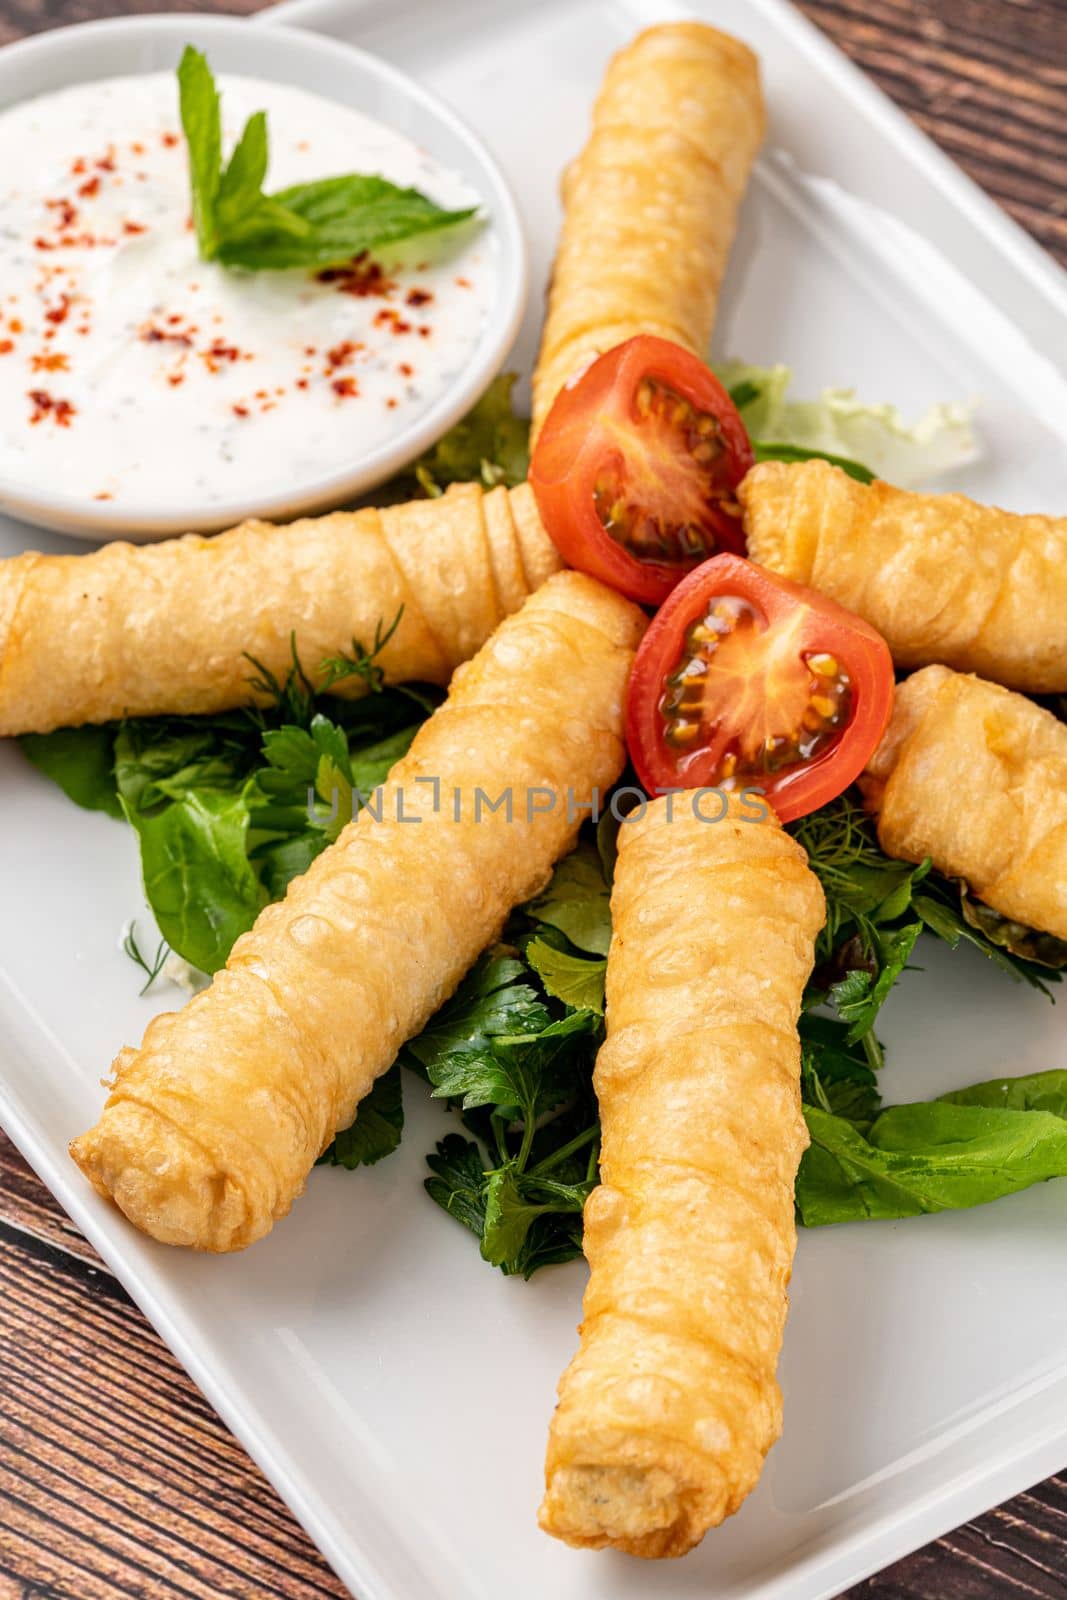 Turkish Cigar Shaped Rolls on a white porcelain plate. The Turkish name is Sigara Boregi